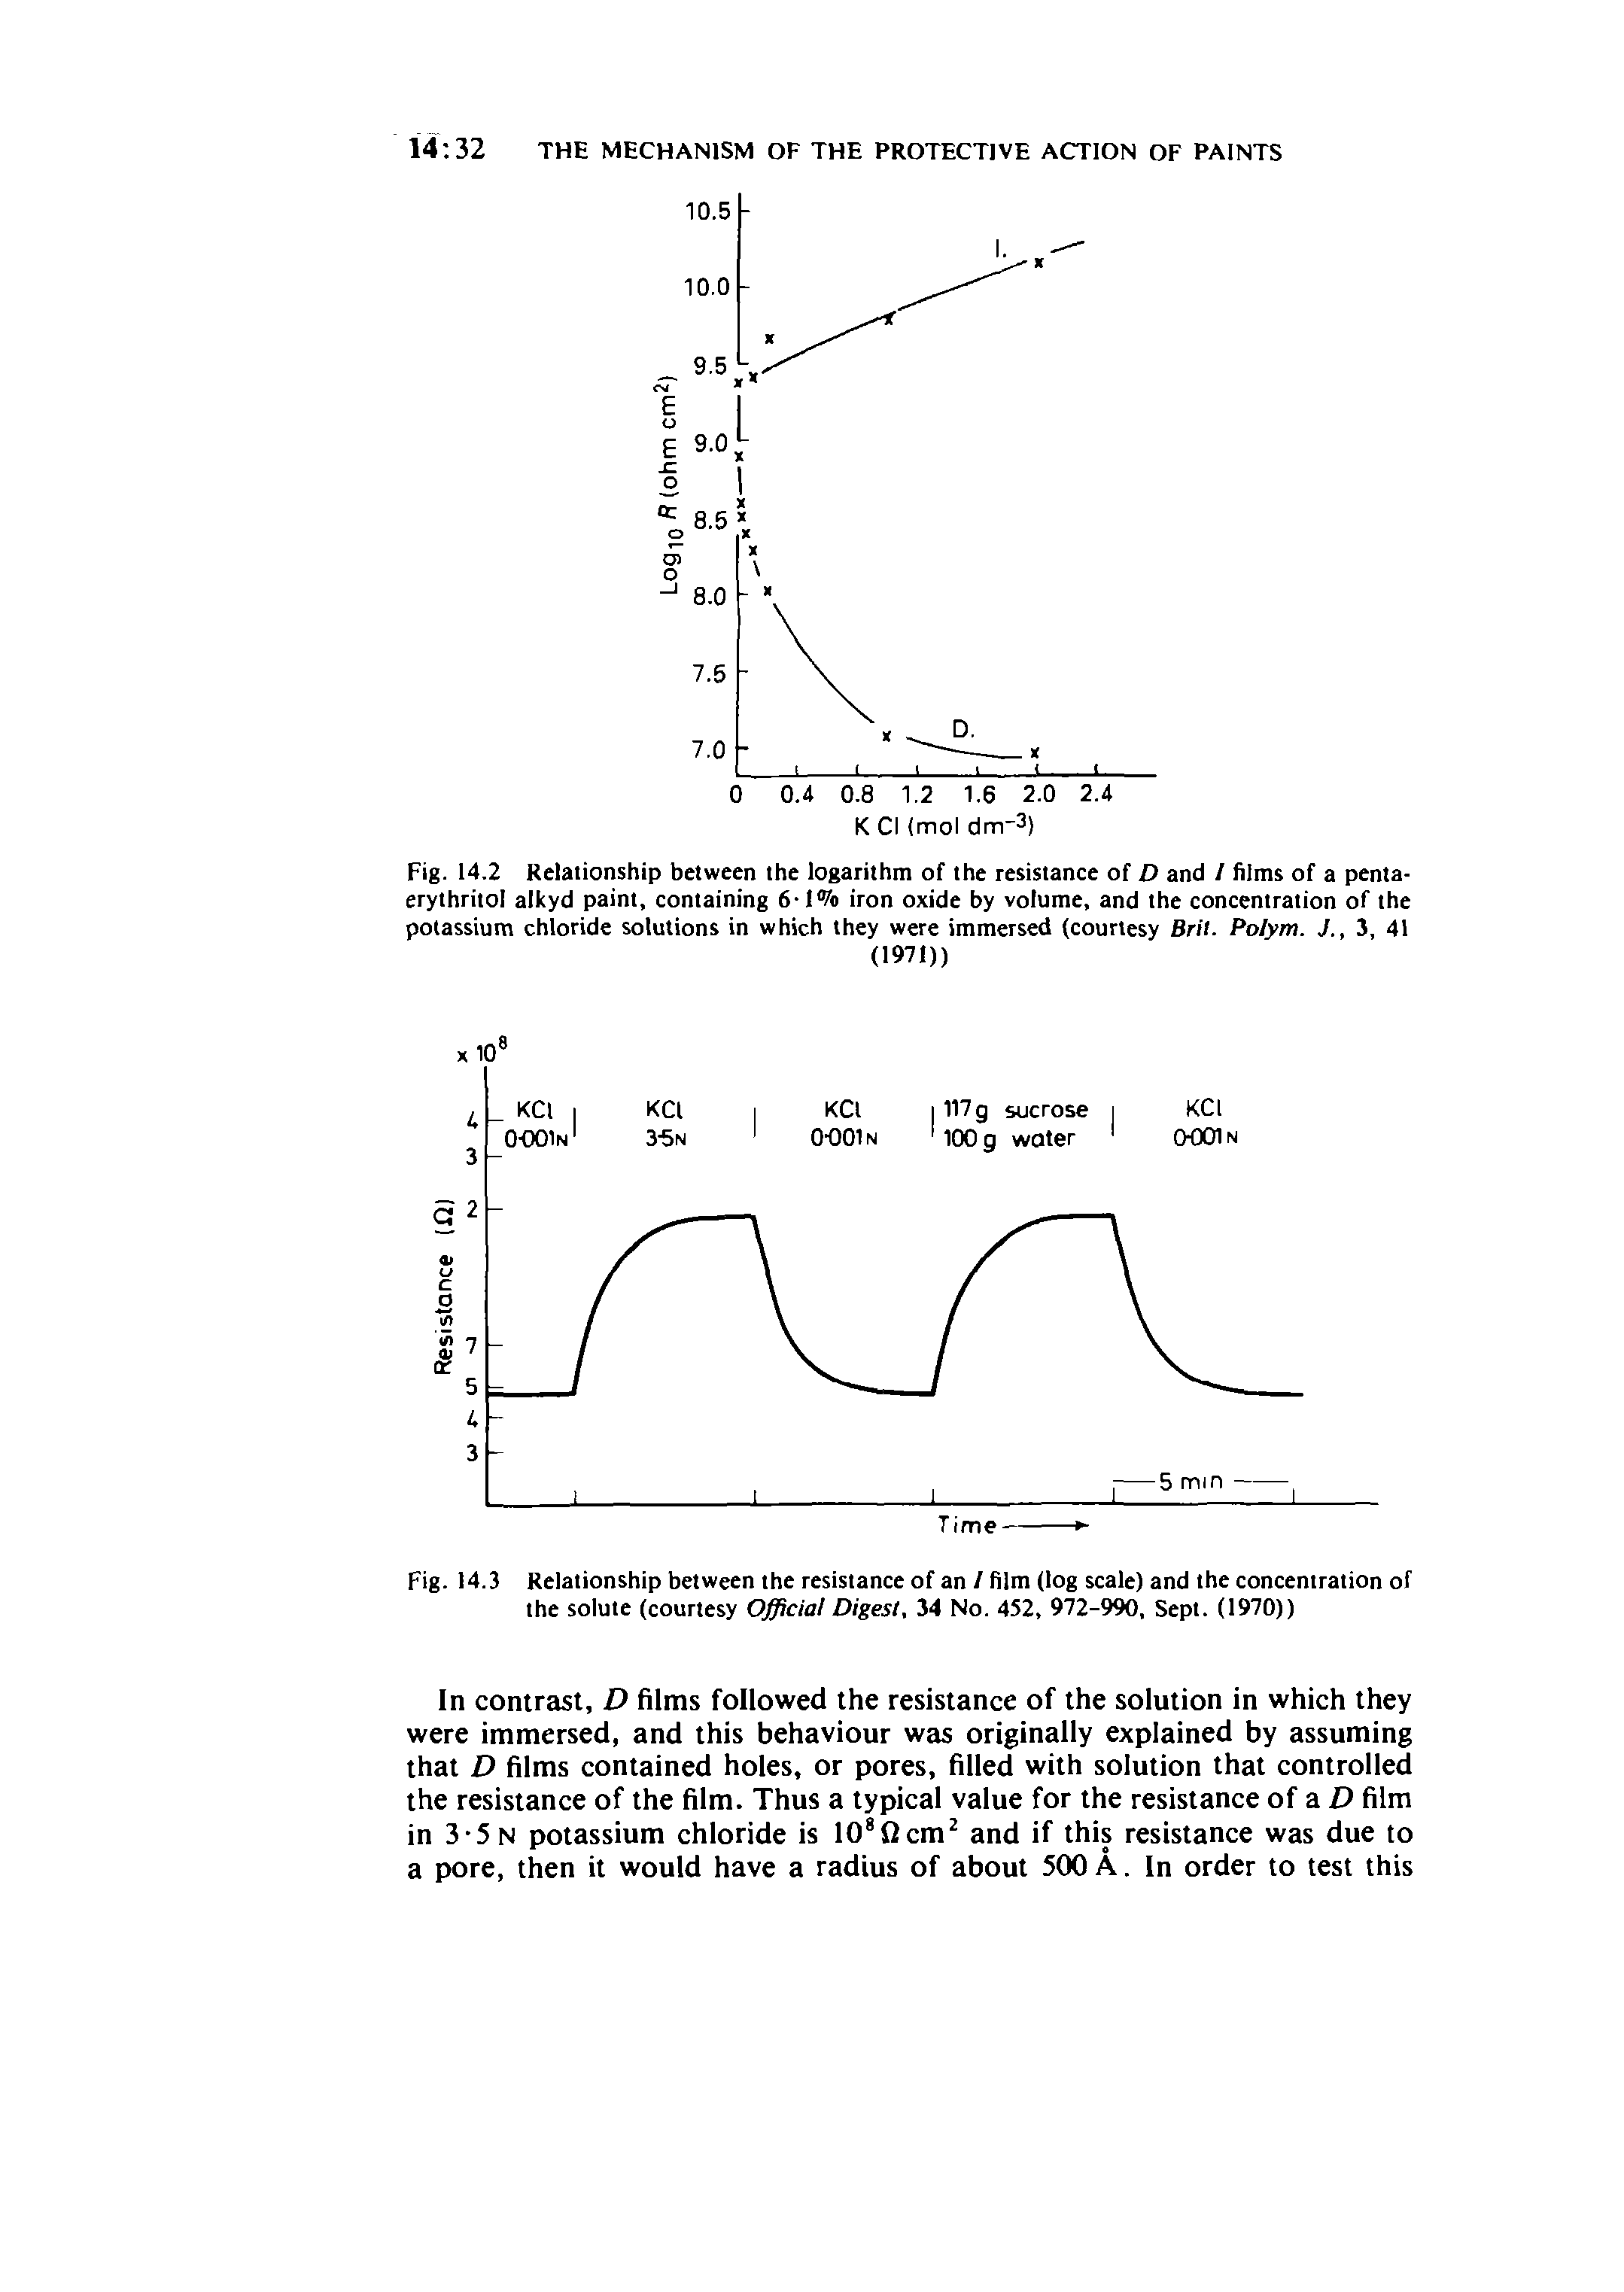 Fig. 14.2 Relationship between the logarithm of the resistance of D and / Aims of a penta-erythritol alkyd paint, containing 6-1% iron oxide by volume, and the concentration of the potassium chloride solutions in which they were immersed (courtesy Bril. Polym. J., 3, 41...